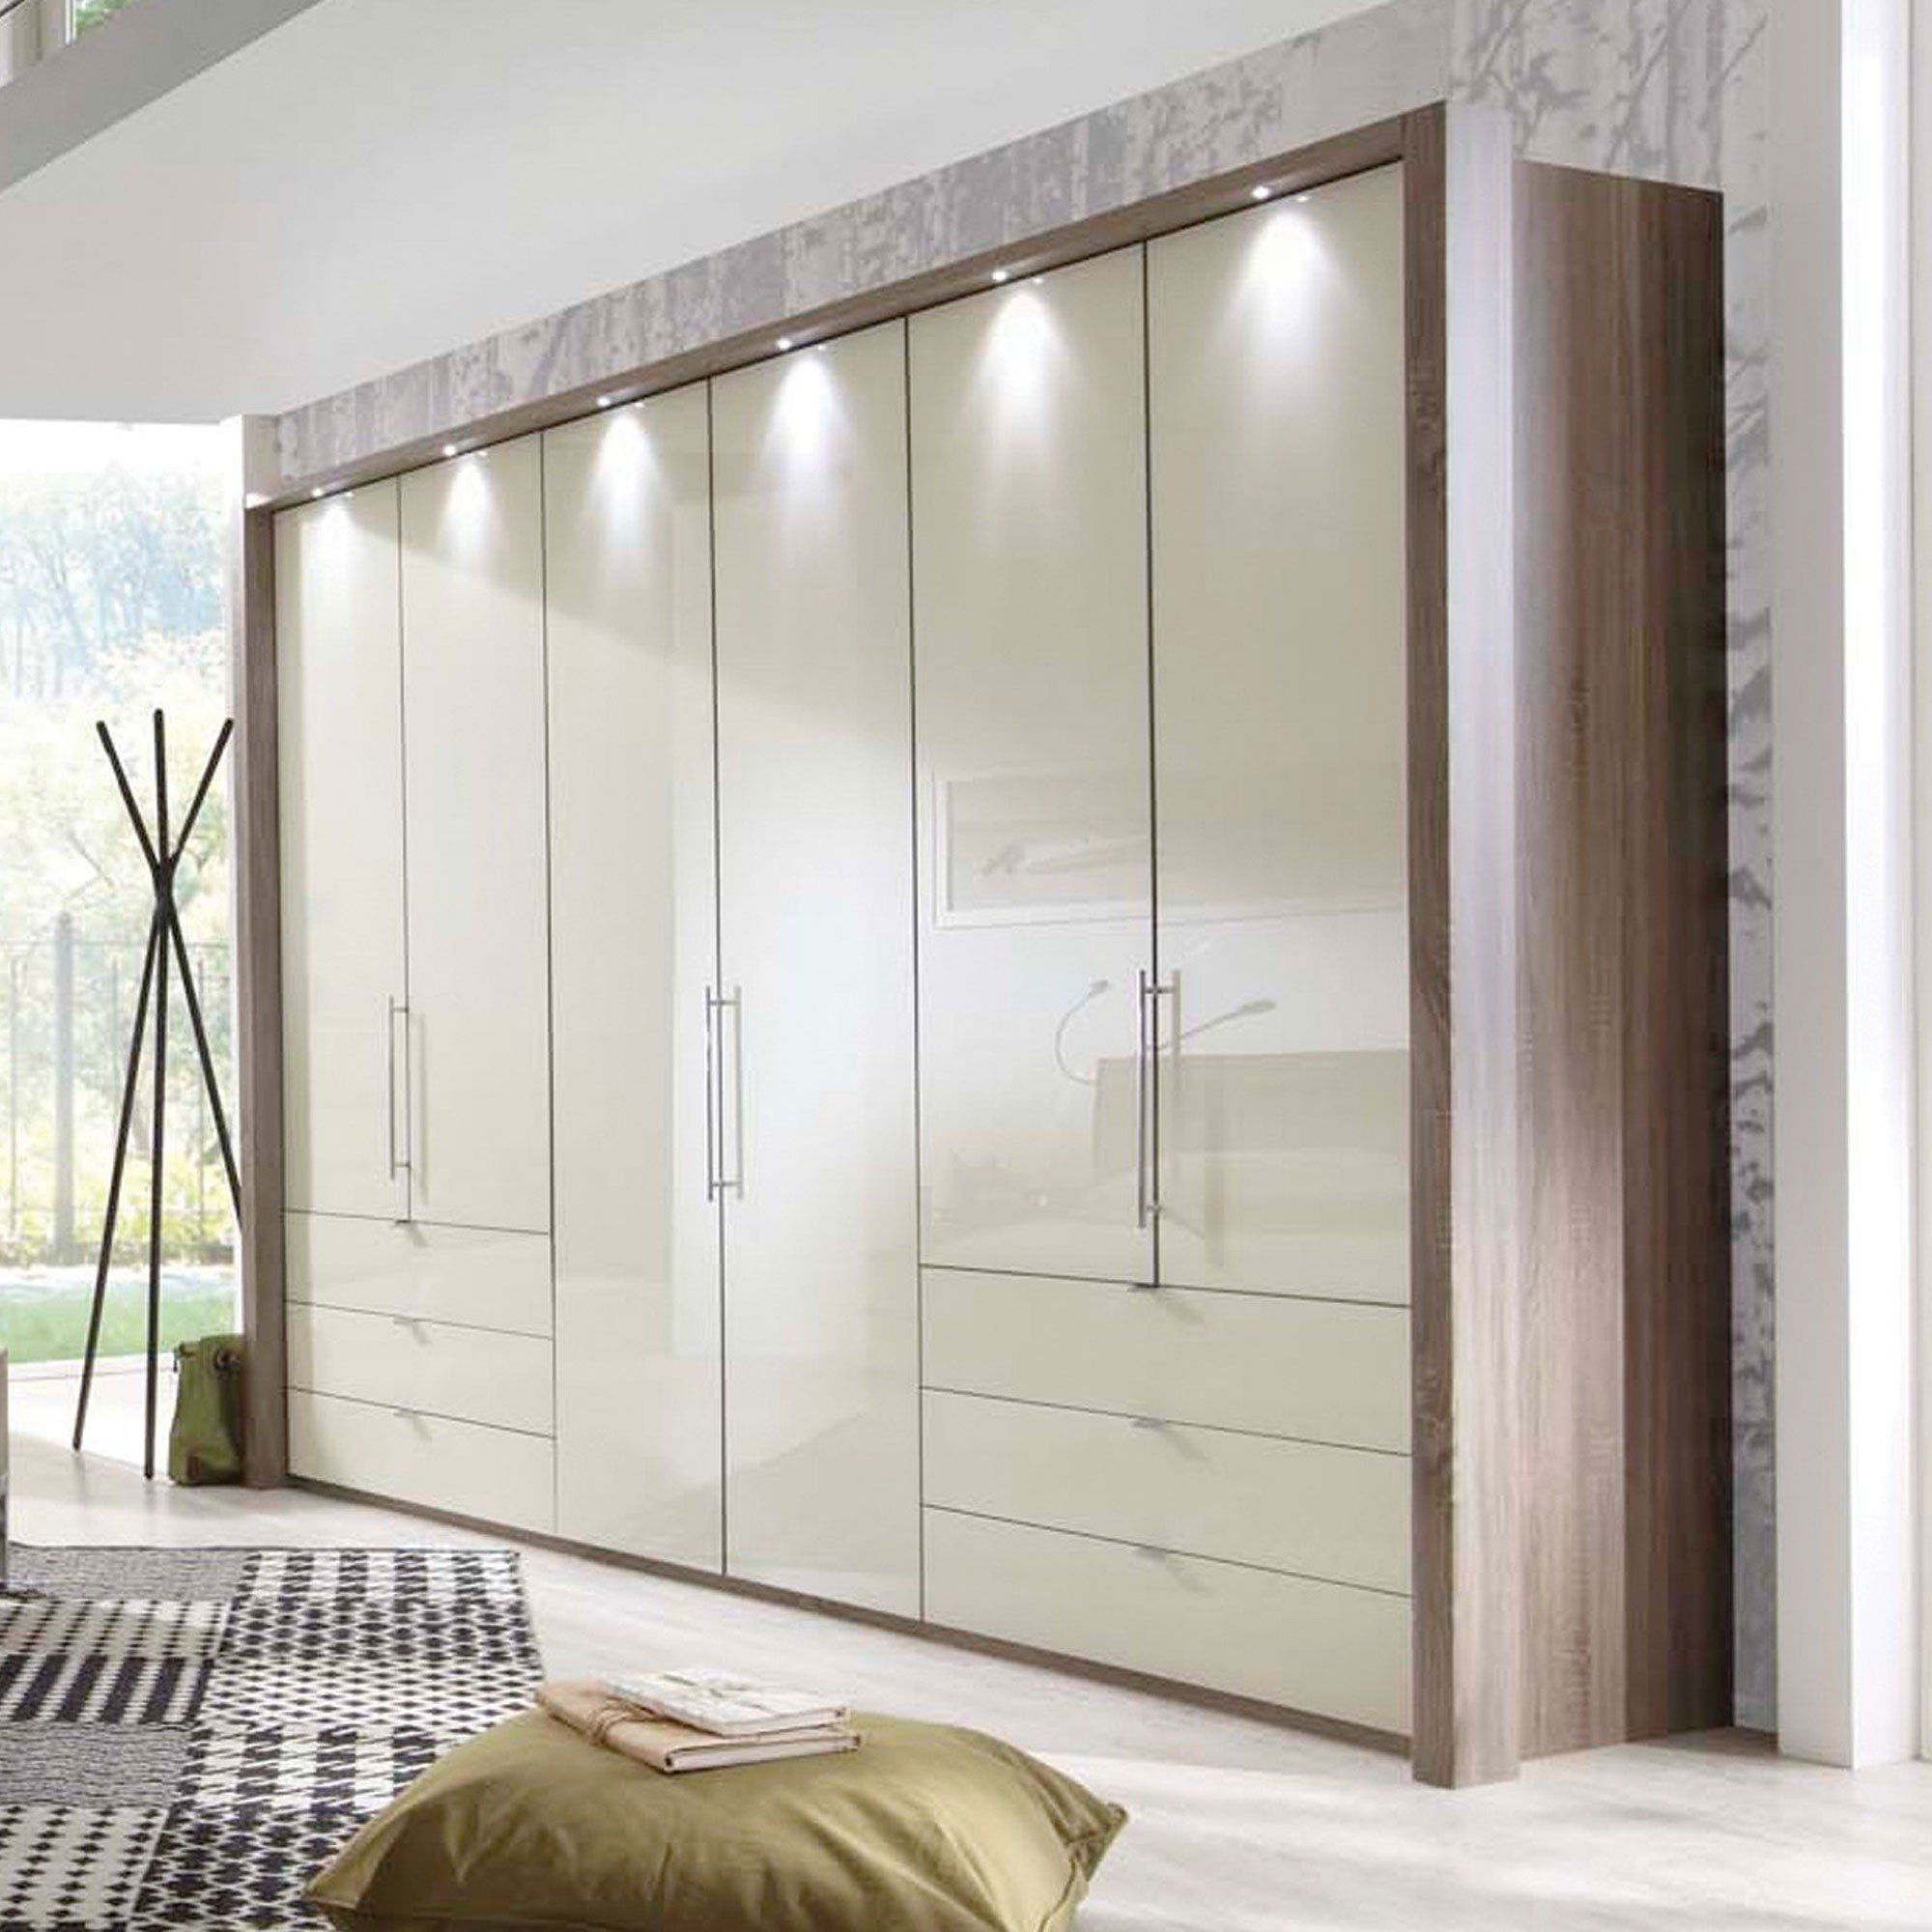 Wiemann Lake Combi Wardrobe – Fitting Included – Aldiss For Combi Wardrobes (View 4 of 20)